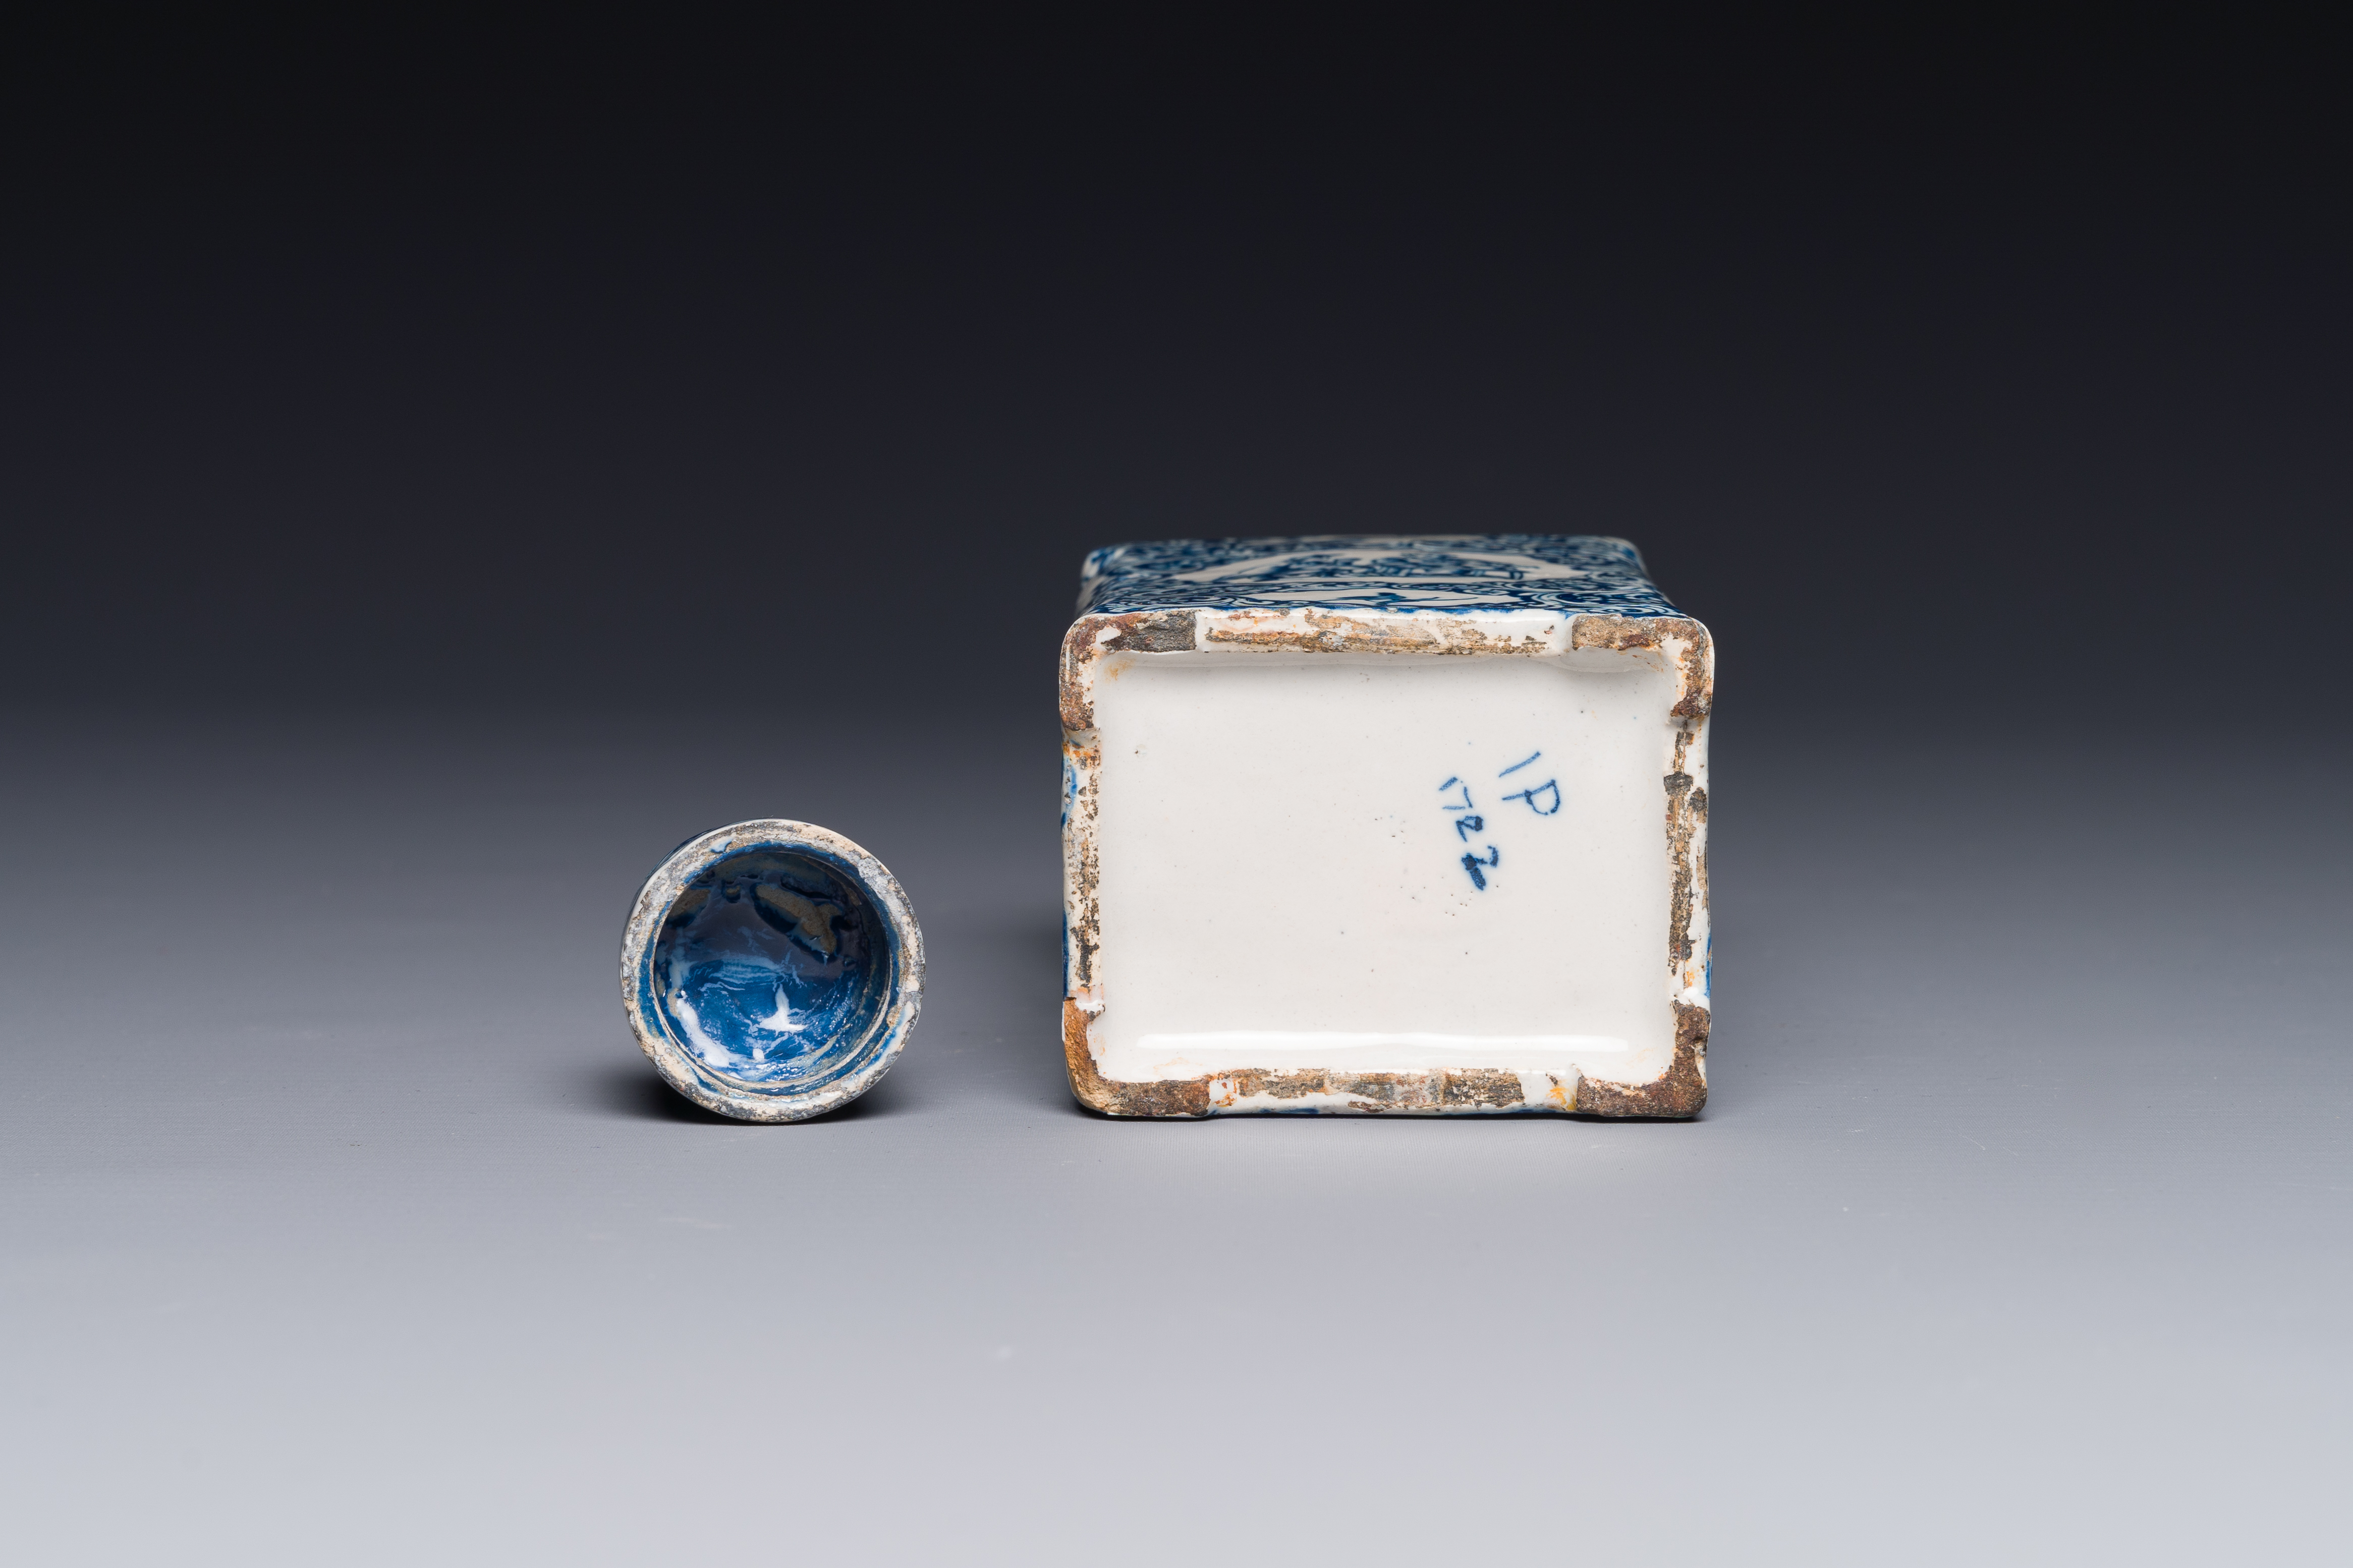 A rectangular Dutch Delft blue and white teacaddy and cover, 18th C. - Image 8 of 10